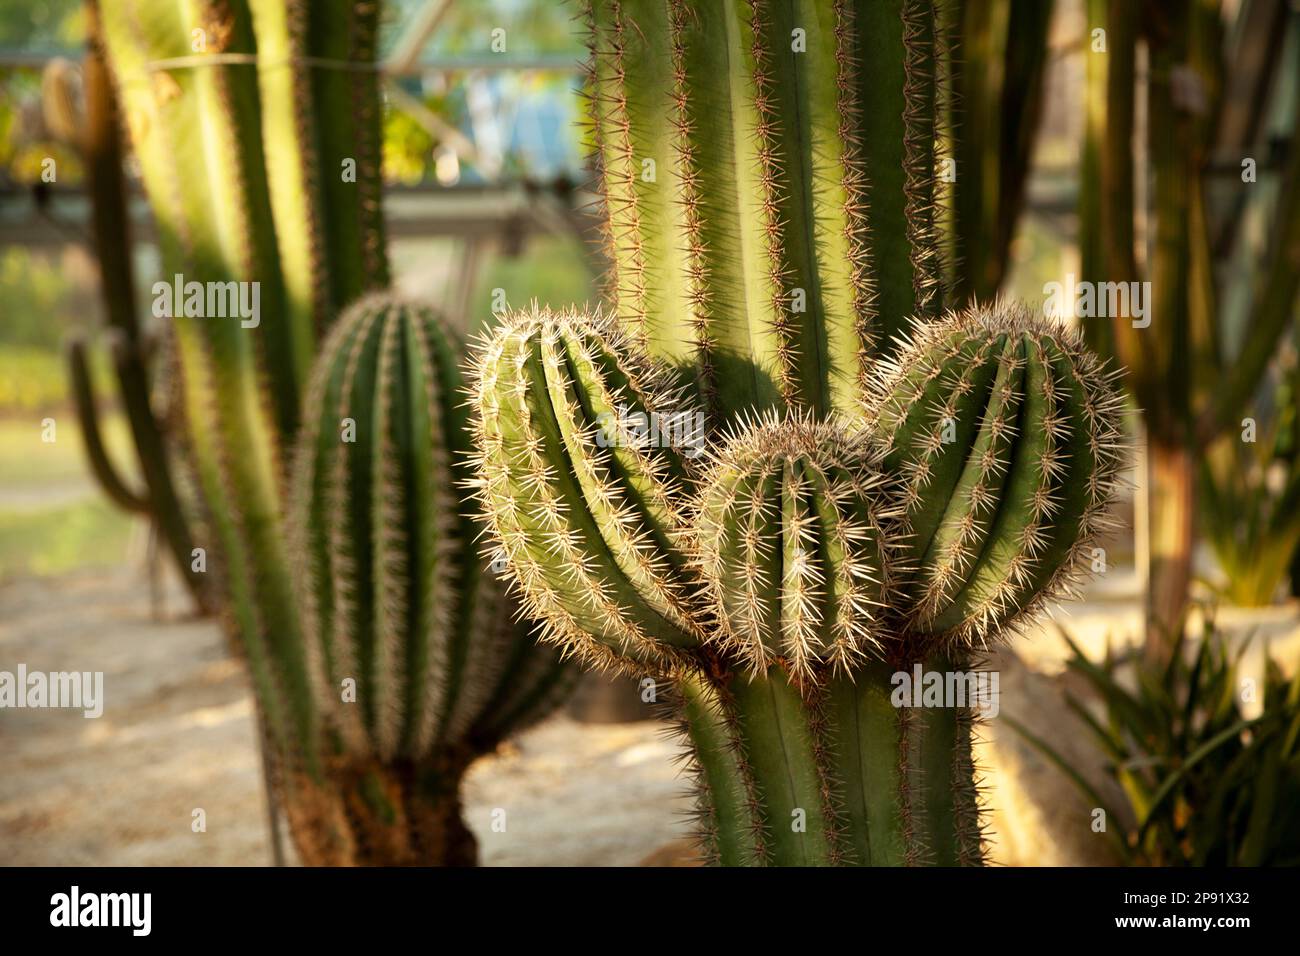 Columnal tree-like cactus with round sprouts close-up. Large cacti green plants background with copy space Stock Photo